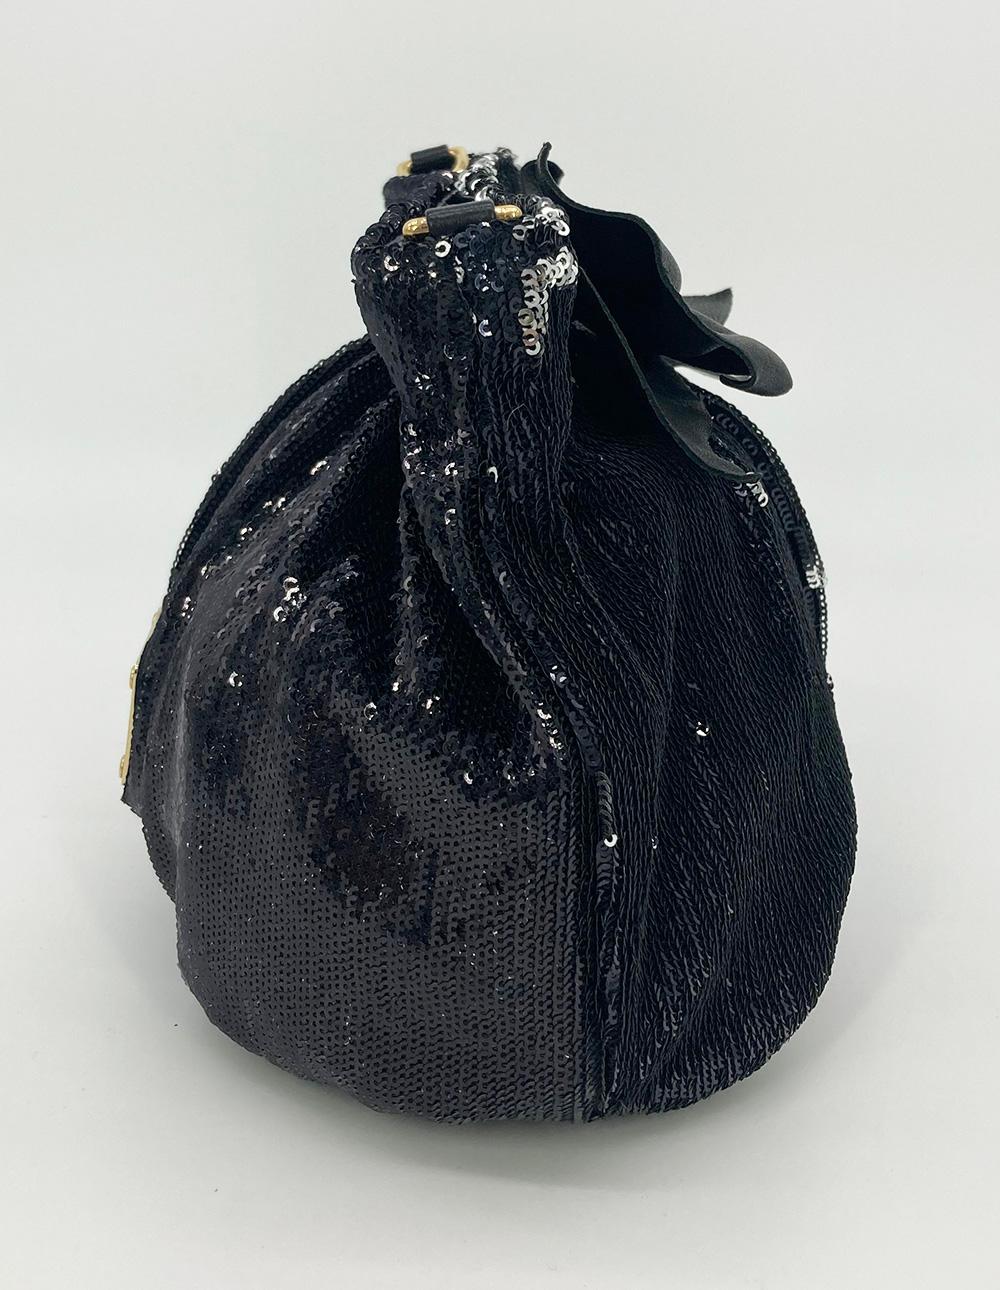 RED Valentino Black Sequin Leather Bow Clutch in excellent condition. Double sided sequin body which changes between black and silver depending on how it's worn, touched or styled. Black leather bow front accent and black leather base. Top magnetic